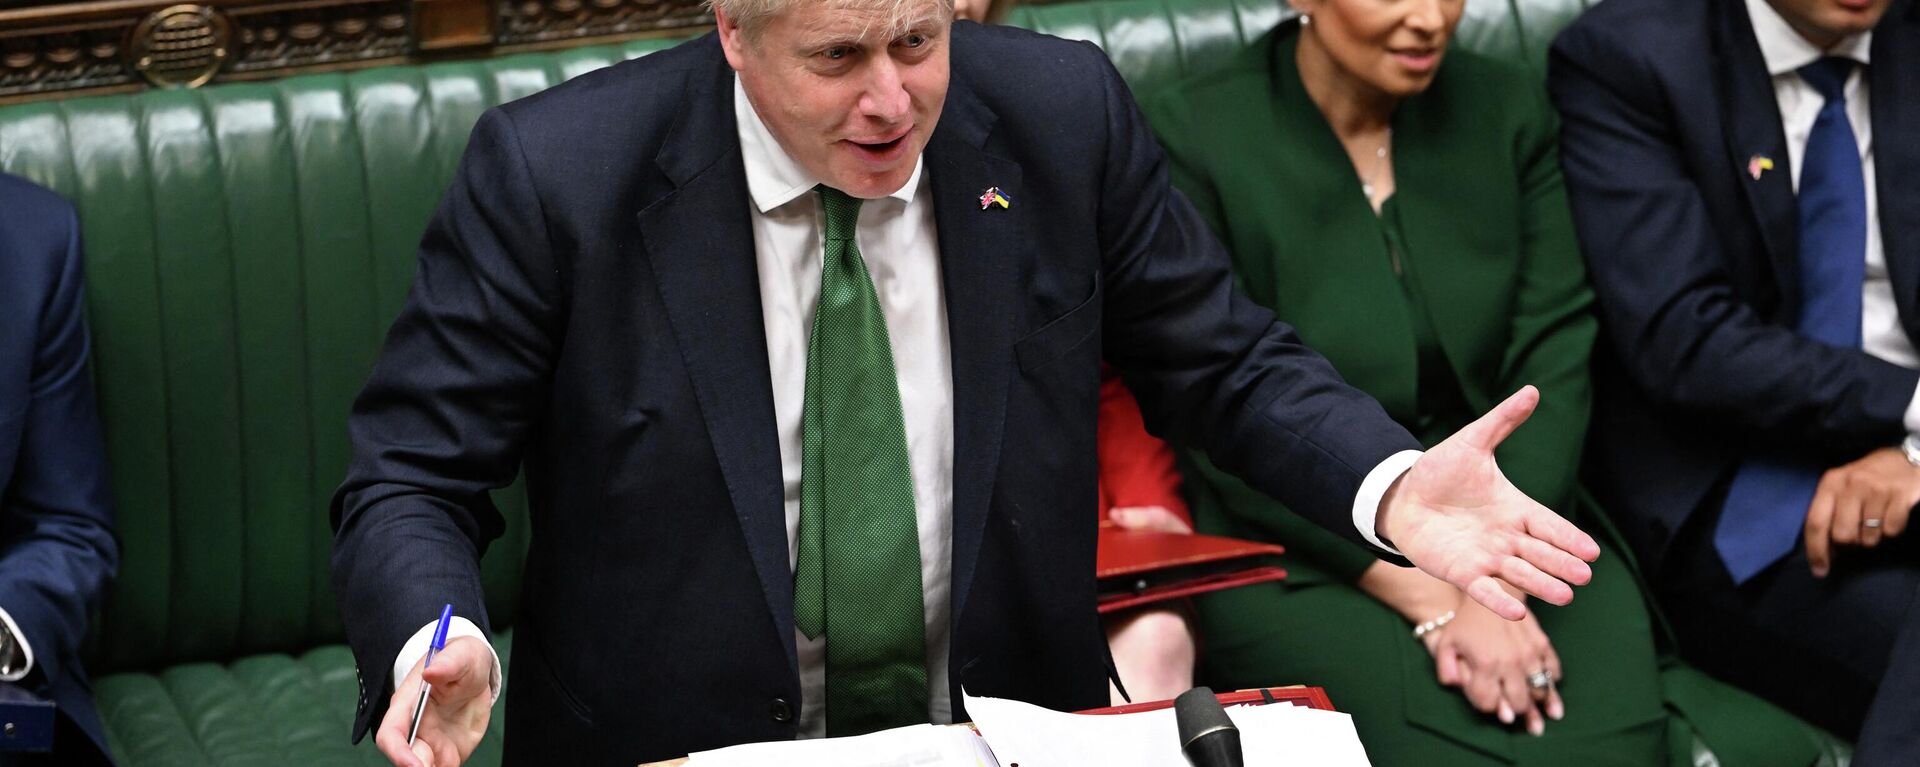 A handout photograph taken and released by the UK Parliament shows Britain's Prime Minister Boris Johnson attending the weekly Prime Minister's Questions (PMQs) session in the House of Commons, in London, on June 8, 2022 - Sputnik International, 1920, 27.06.2022